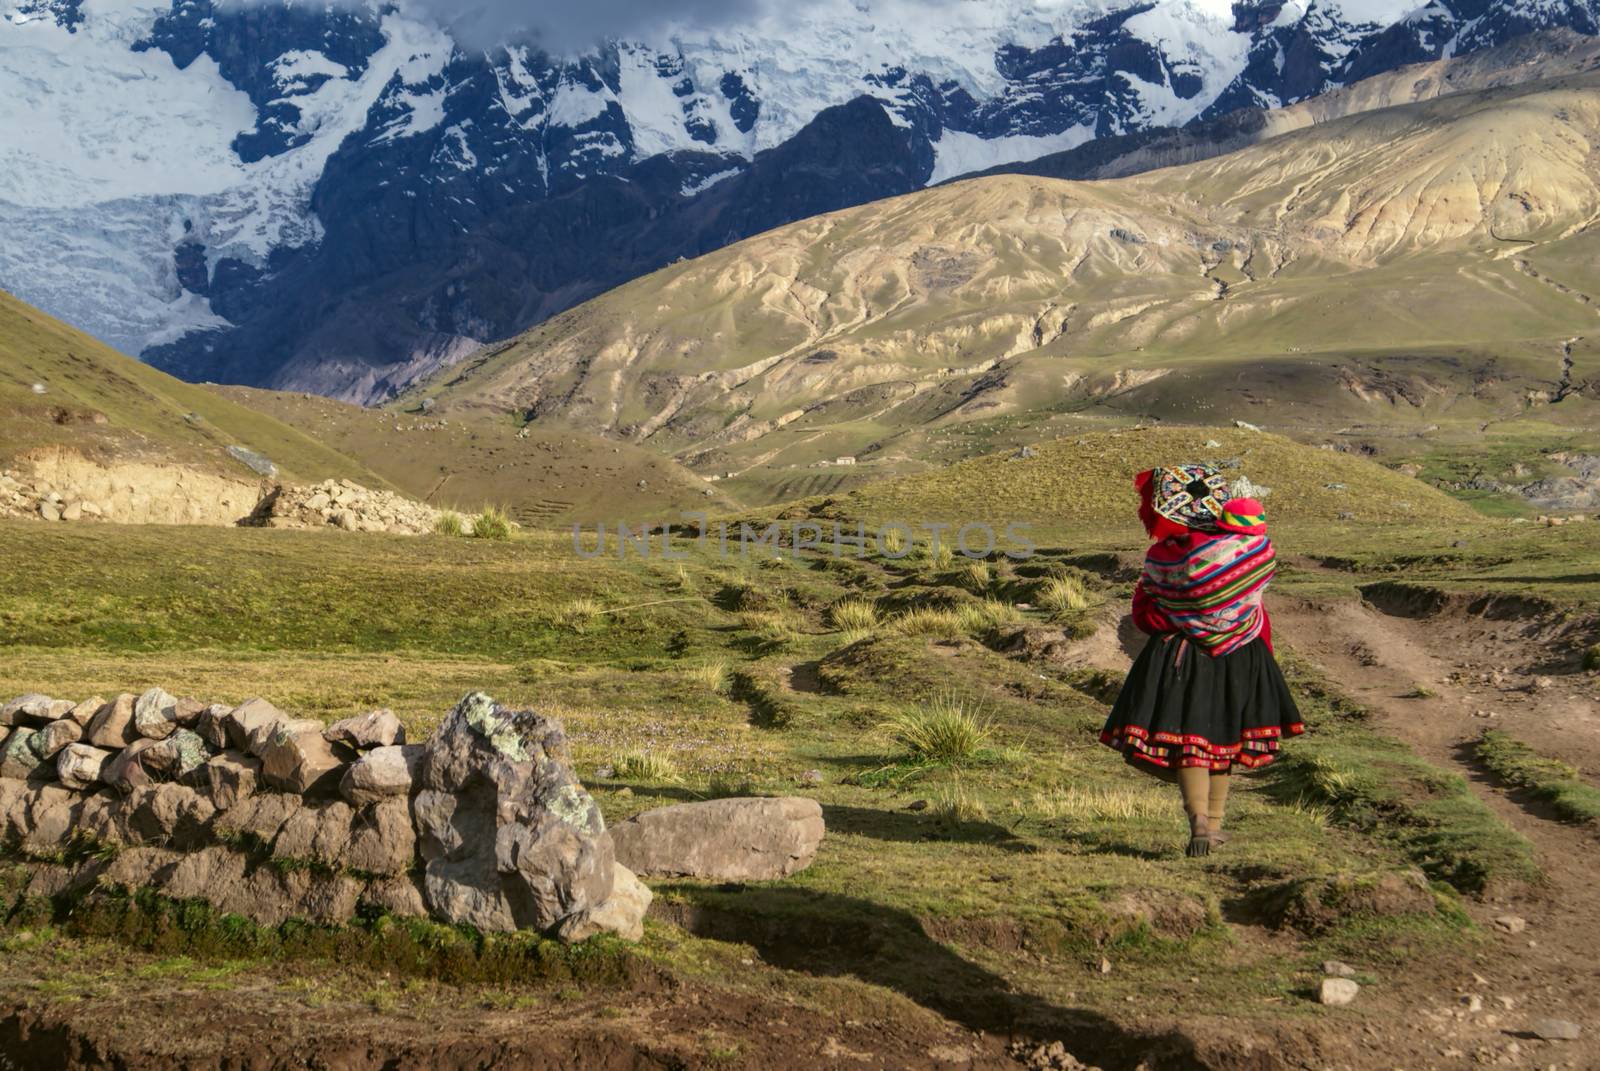 A Peruvian woman walking with a child on her back in South American Andes